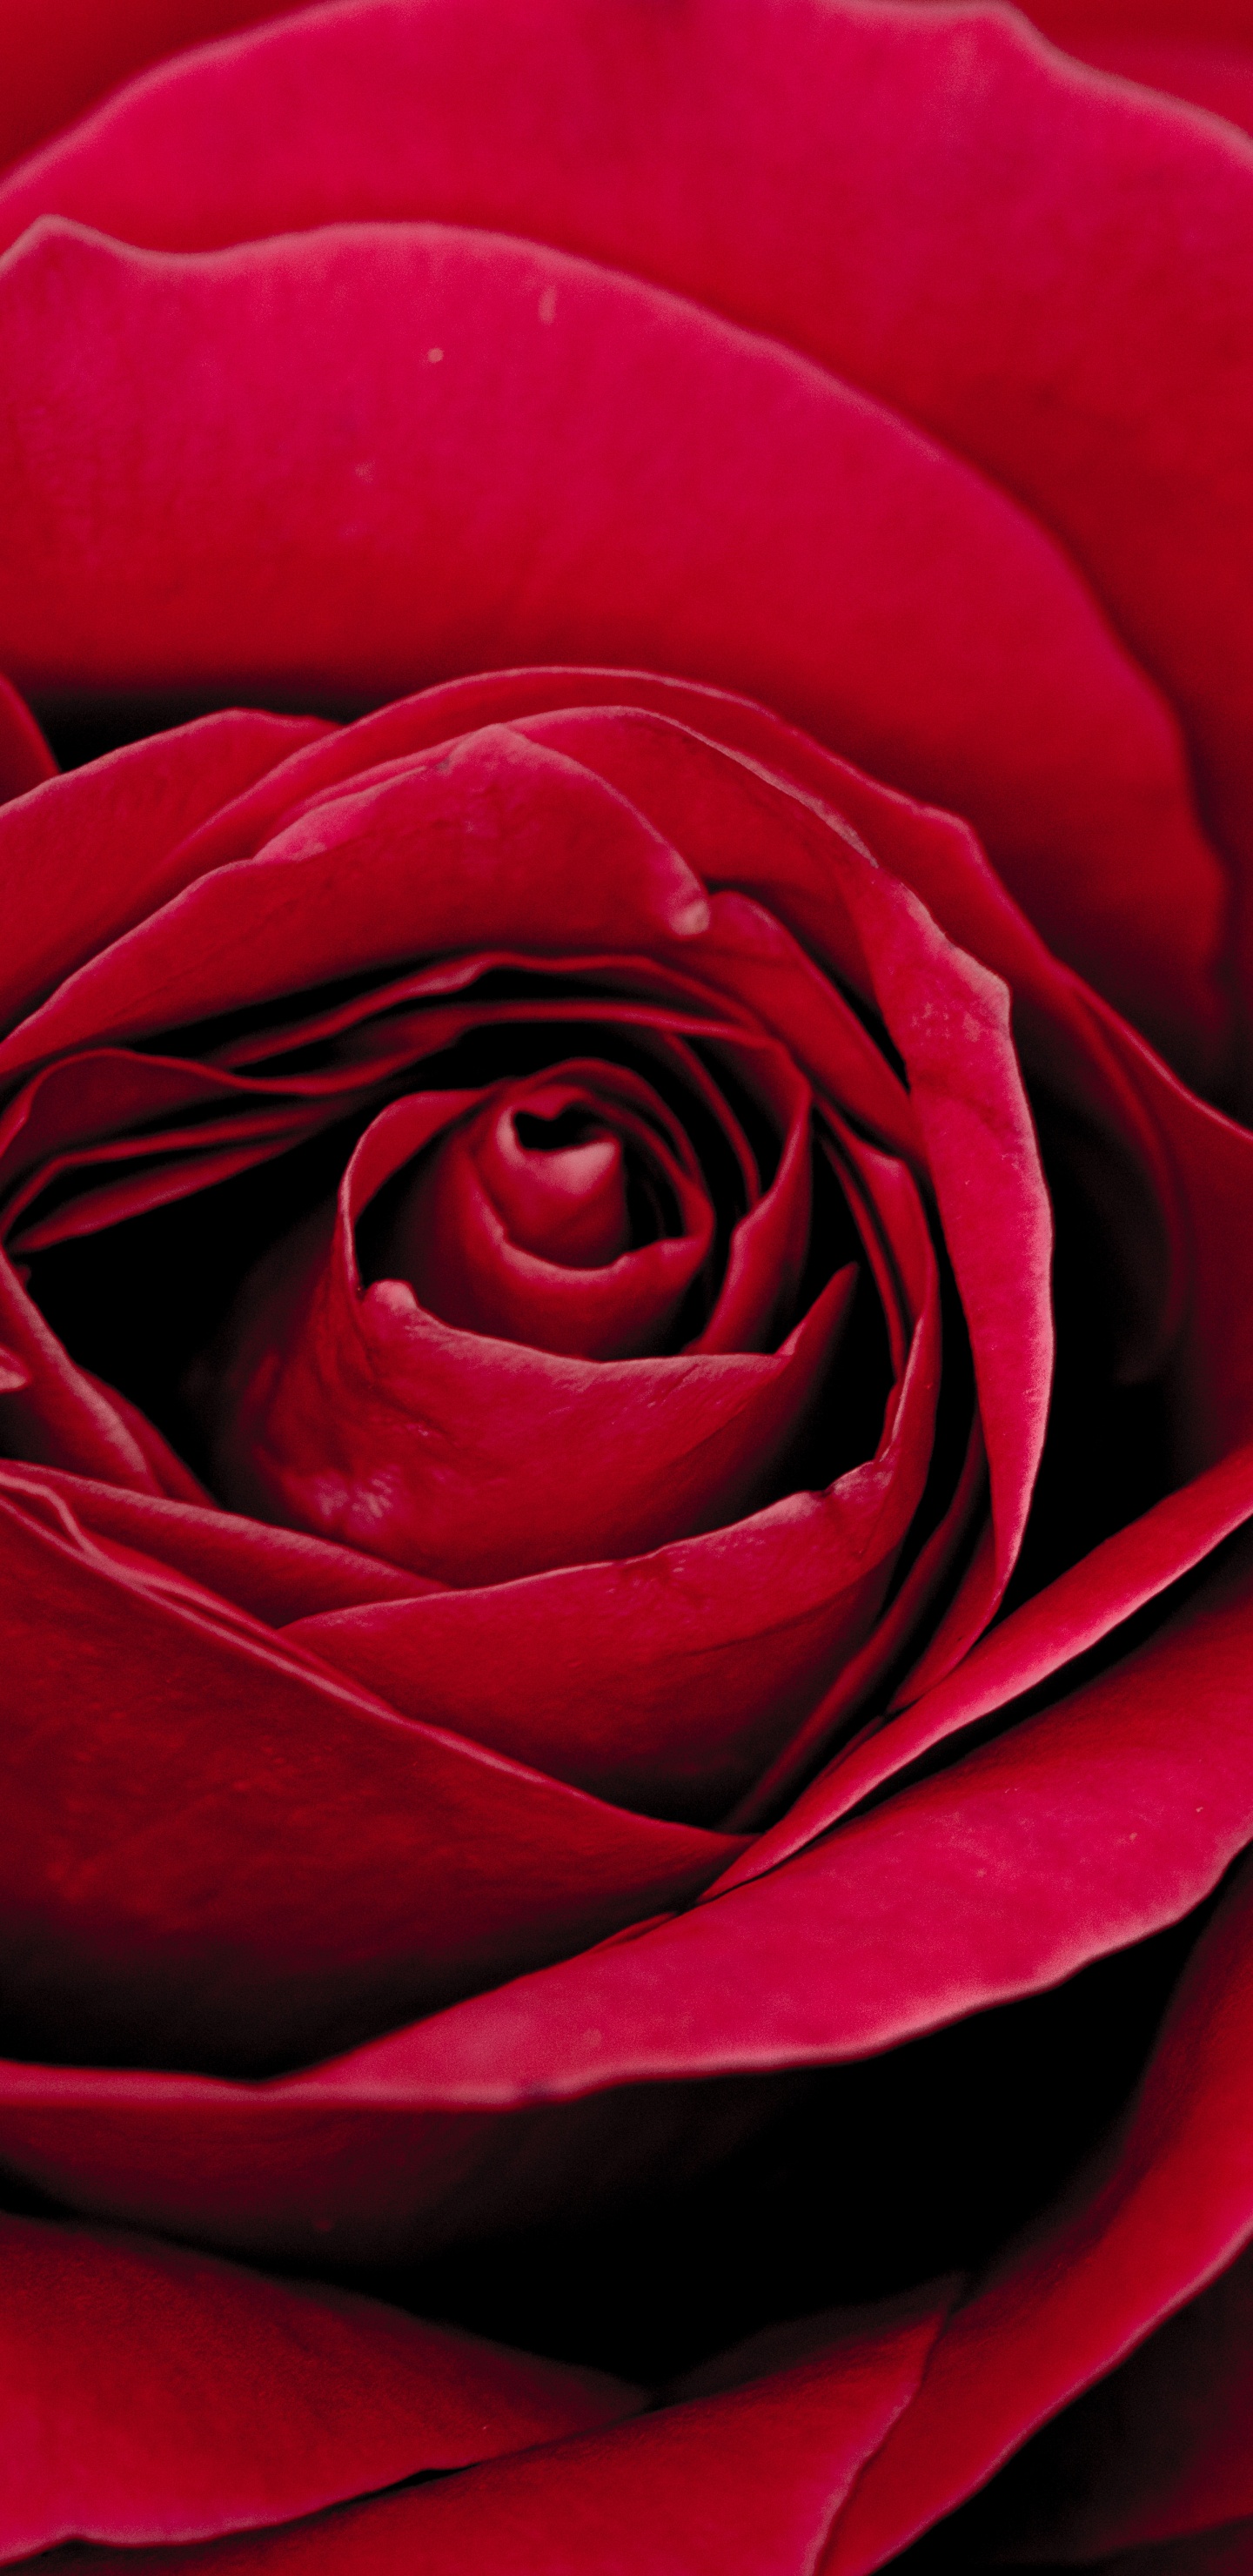 Red Rose in Bloom Close up Photo. Wallpaper in 1440x2960 Resolution